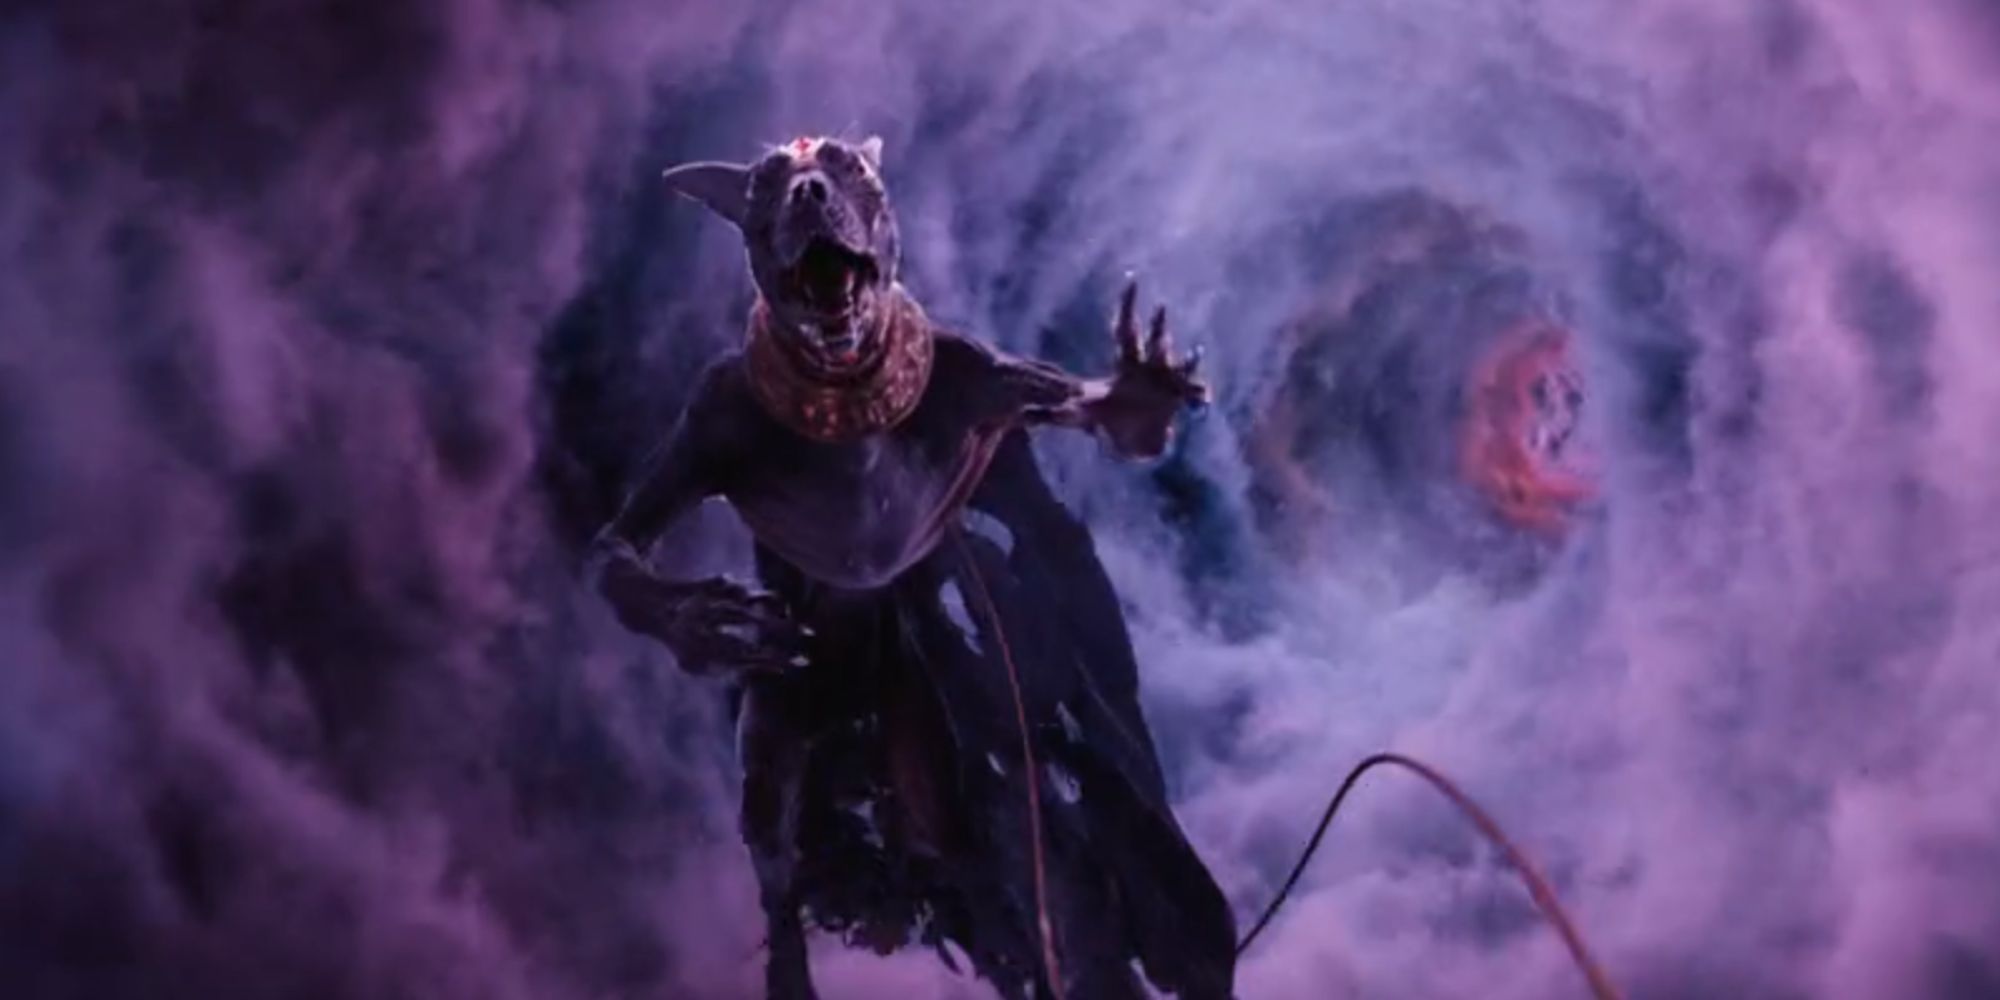 Sutekh in the Time Vortex in Doctor Who